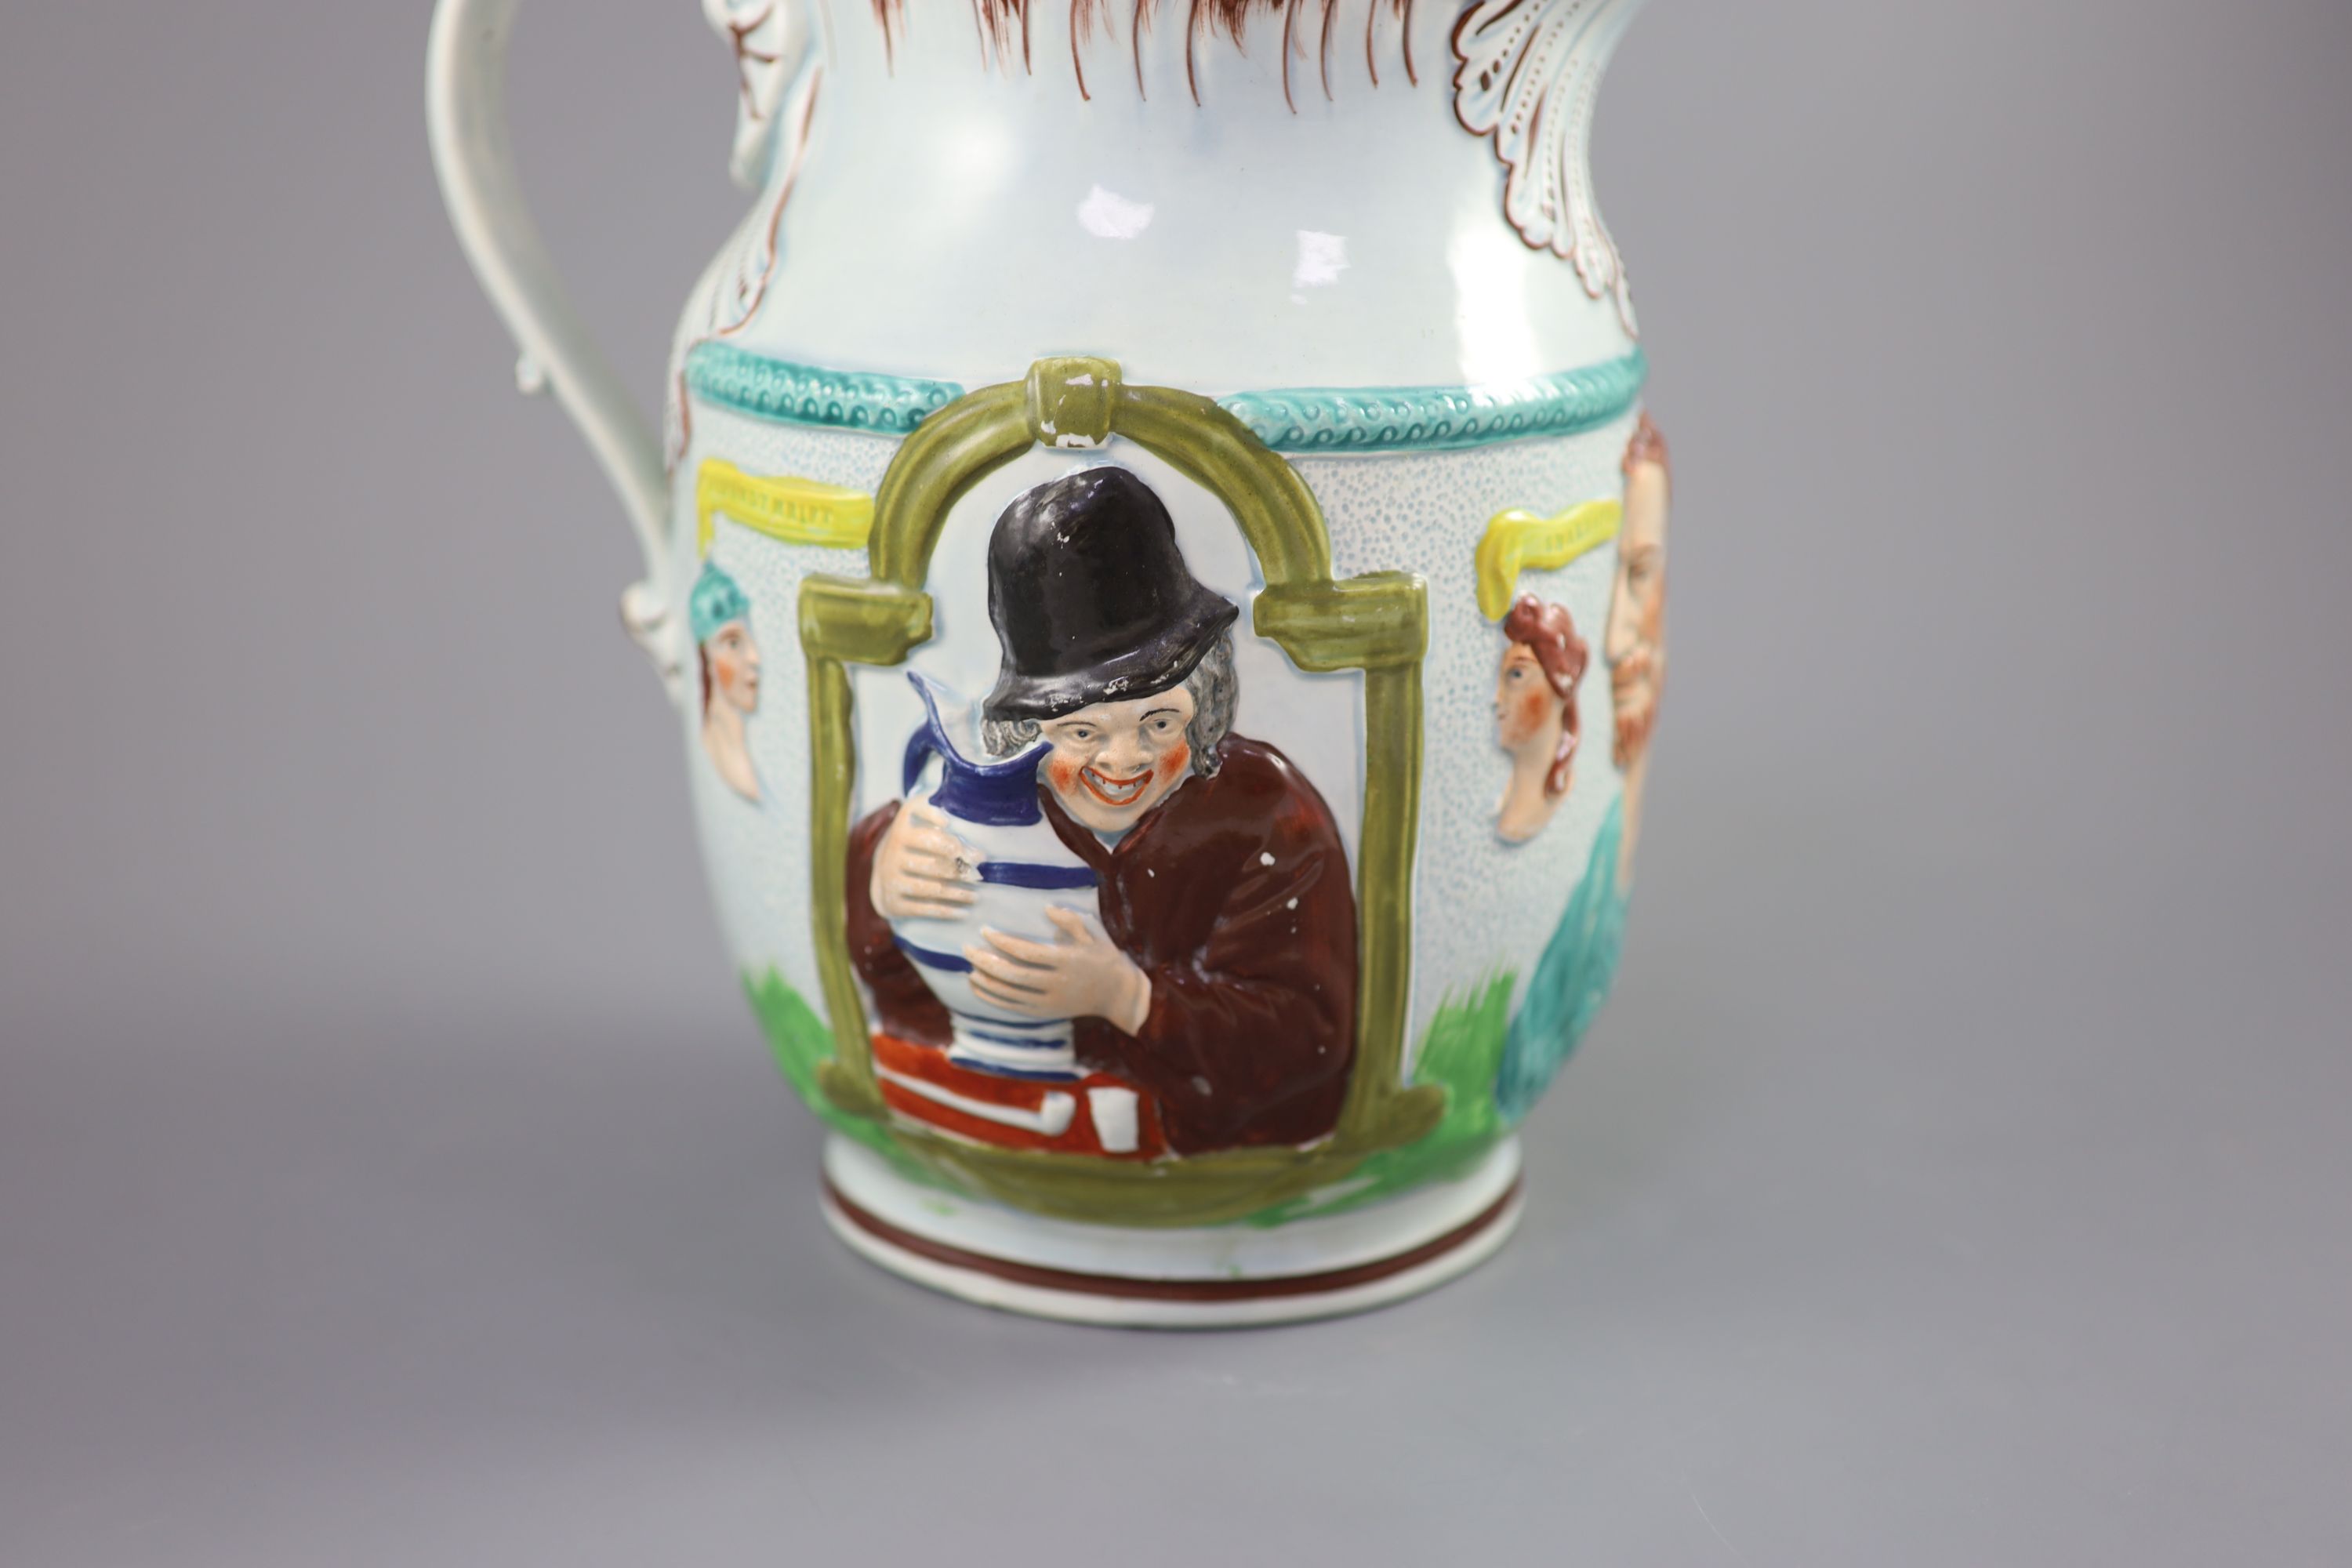 A Staffordshire pearlware Shakespear The Poet The Miser and Spendthrift jug, c.1800, 23cm high